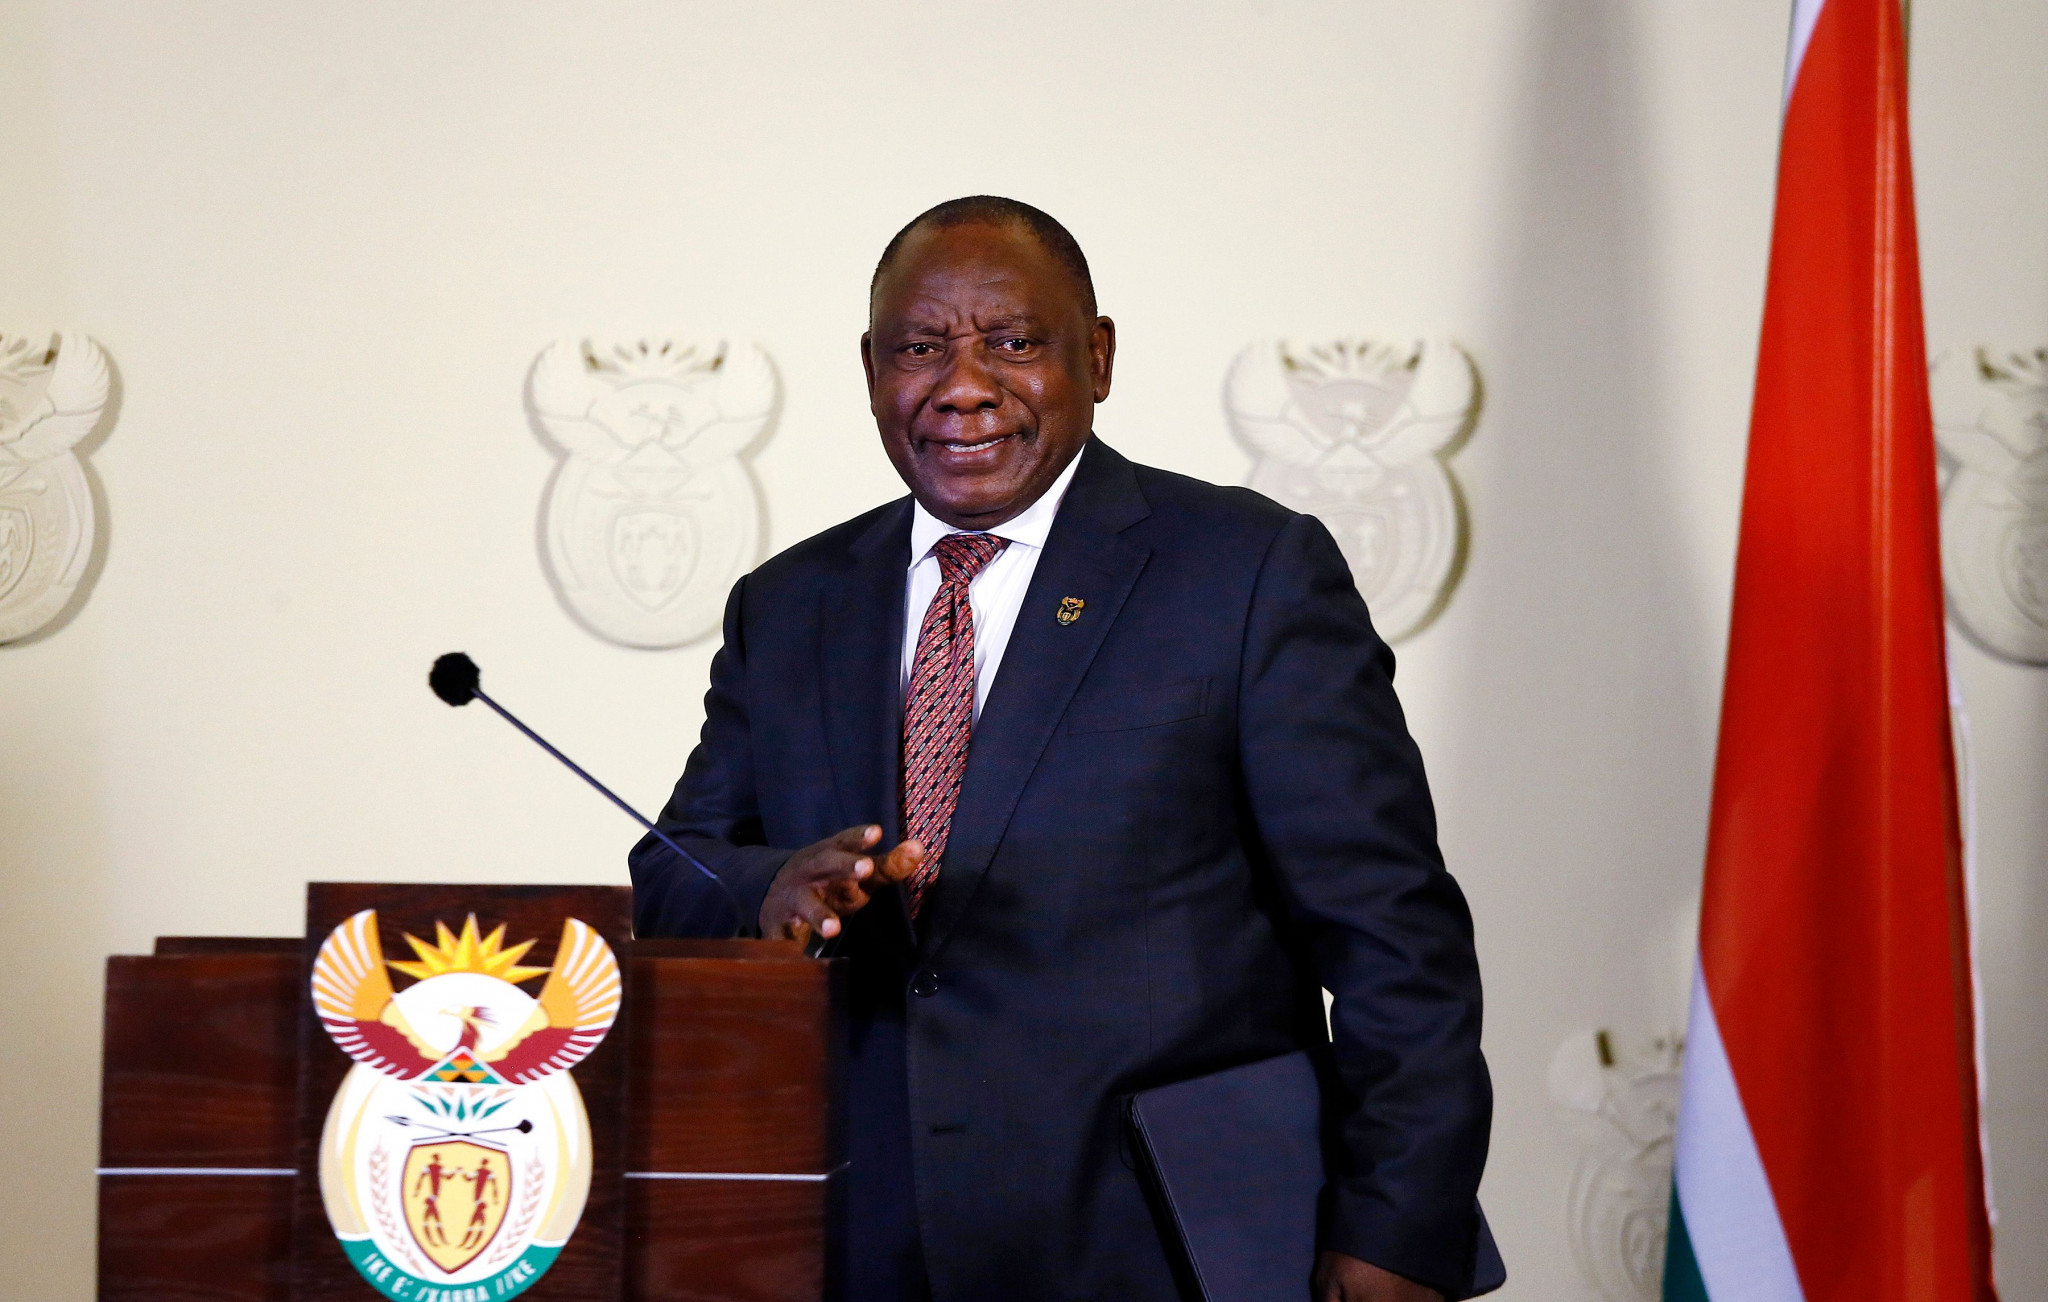 Cyril Ramaphosa, President of South Africa, has been replaced as African Union chairperson by Félix Tshisekedi, President of the Democratic Republic of Congo ©Getty Images